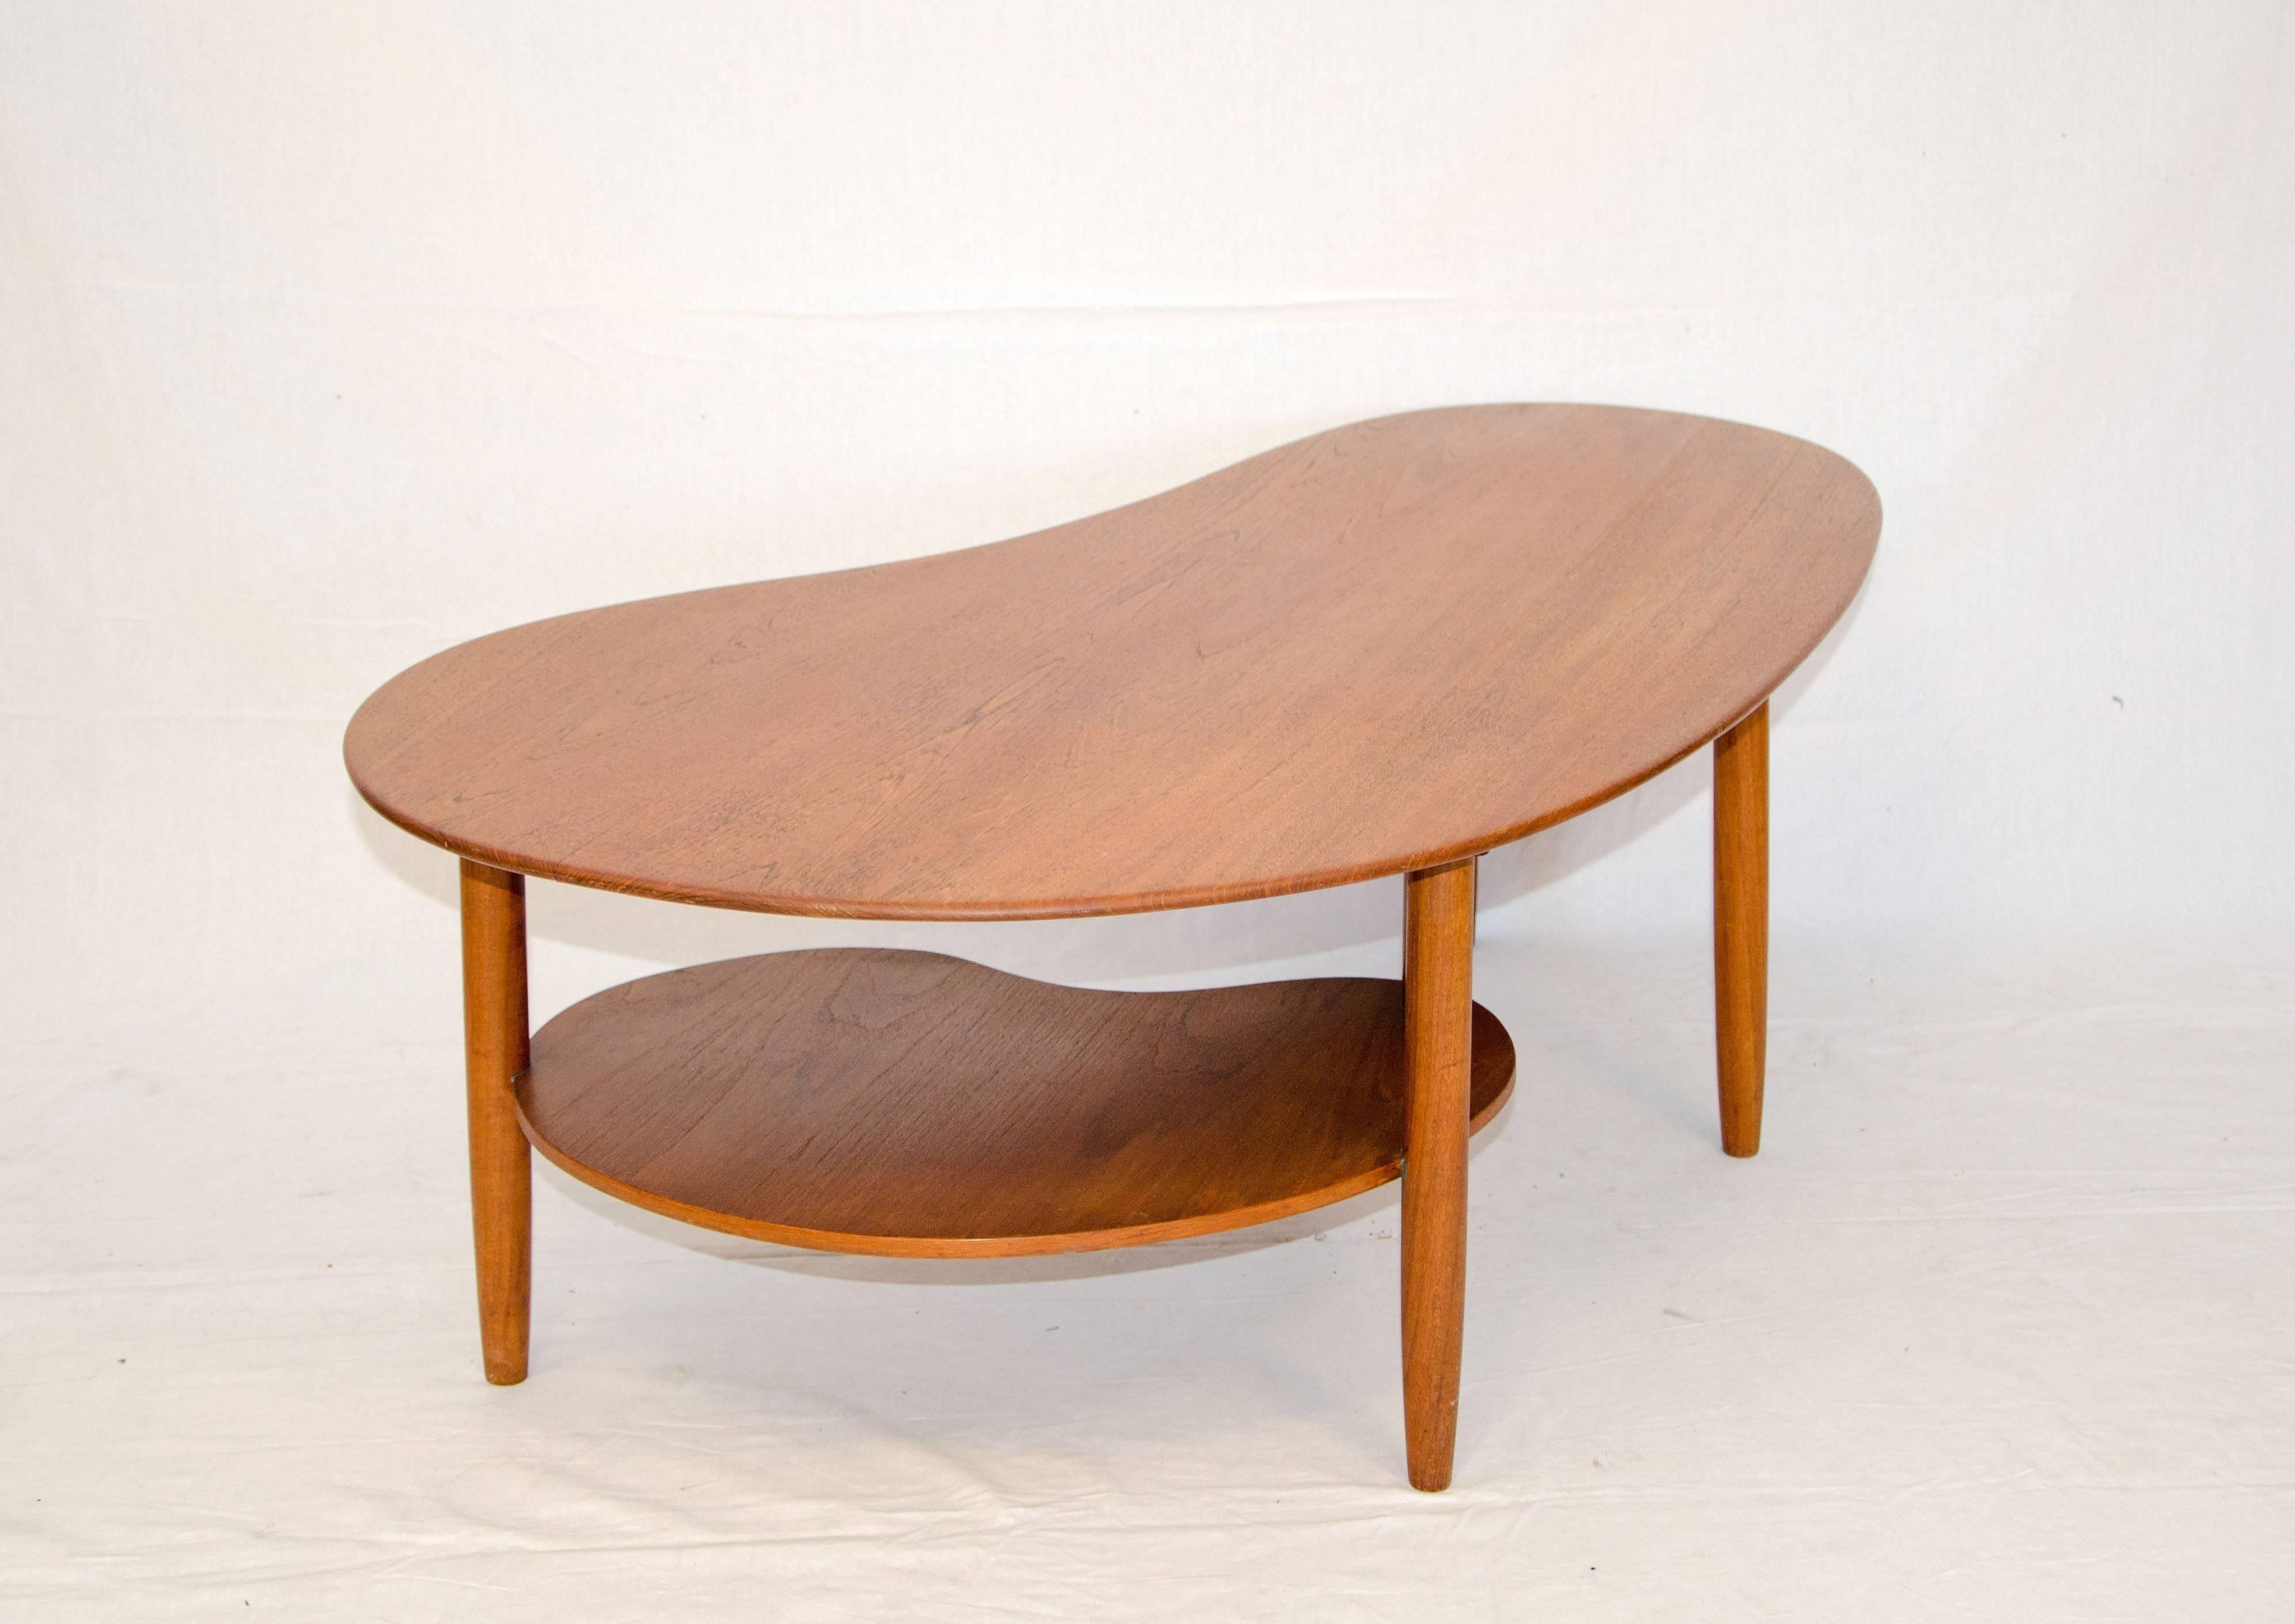 kidney bean shaped coffee table